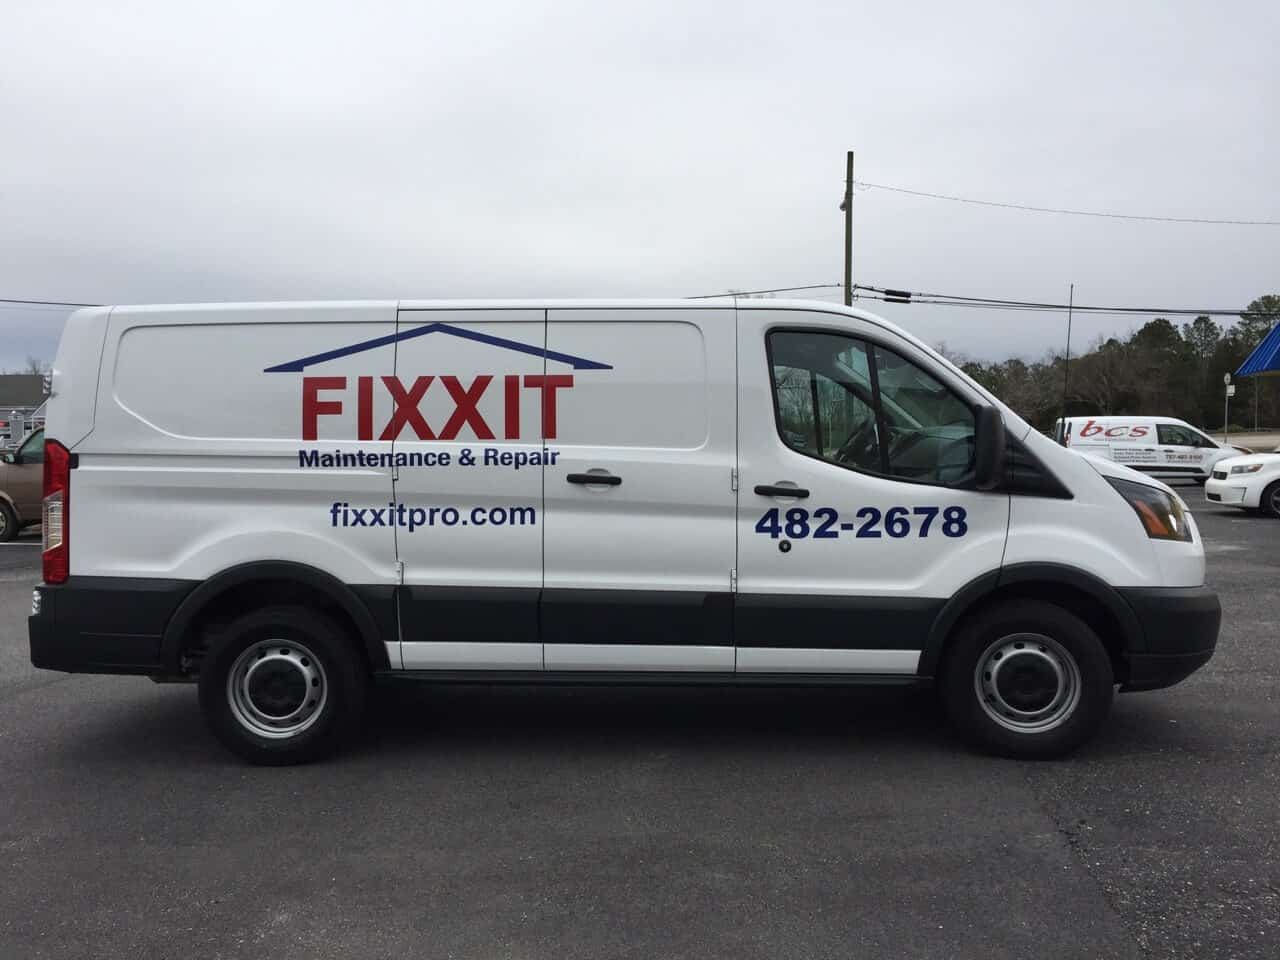 Partial van graphics for remodeling business